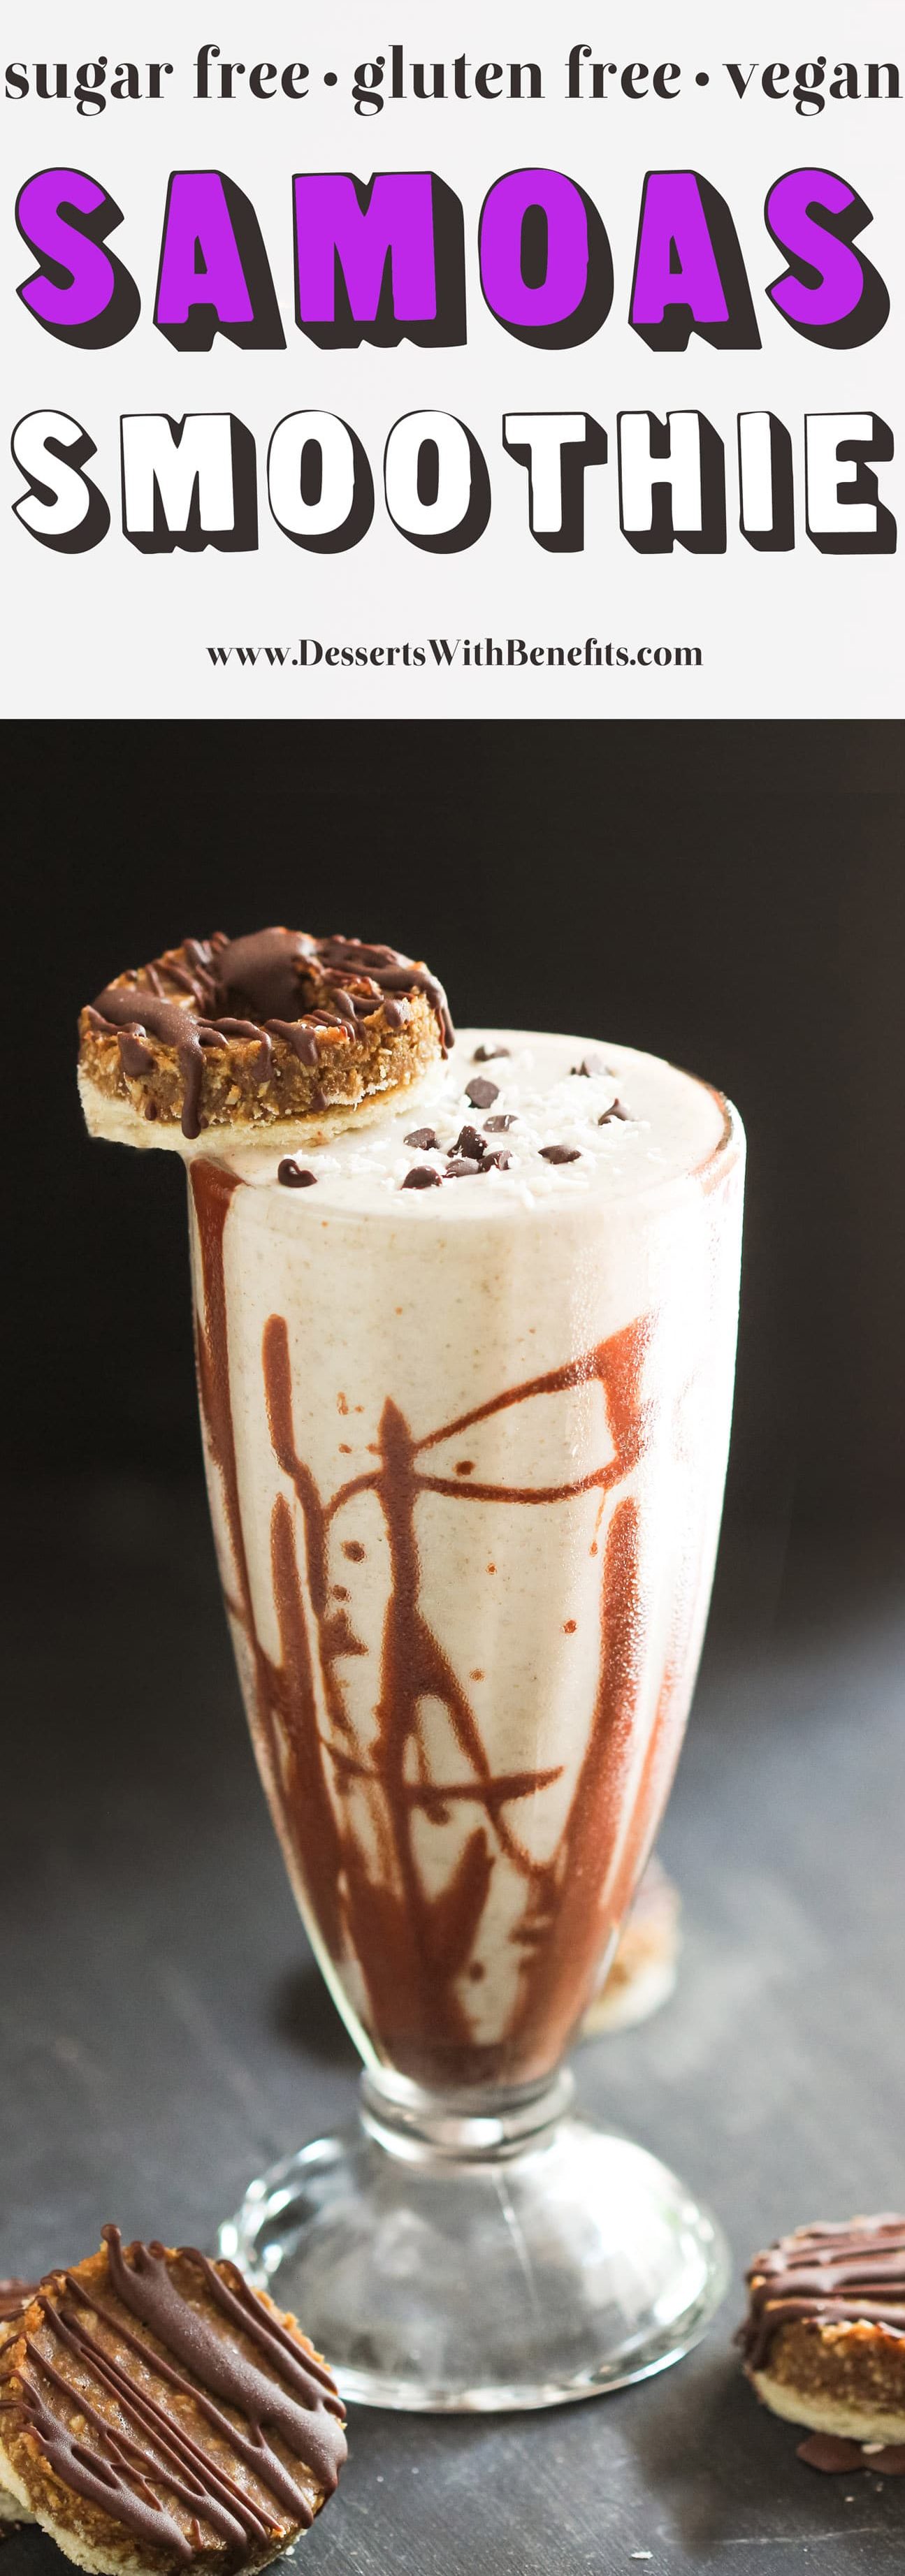 Healthy Samoas Smoothie! If you're craving something full of caramel, coconut, and chocolate flavor, this recipe is for you! No need for the sugary Girl Scouts cookies made with highly processed, artificial ingredients when this creamy smoothie is around. Oh, and it's totally breakfast worthy -- it's sugar free, low fat, gluten free, dairy free, and vegan too! Healthy Dessert Recipes at the Desserts With Benefits Blog (www.DessertsWithBenefits.com)